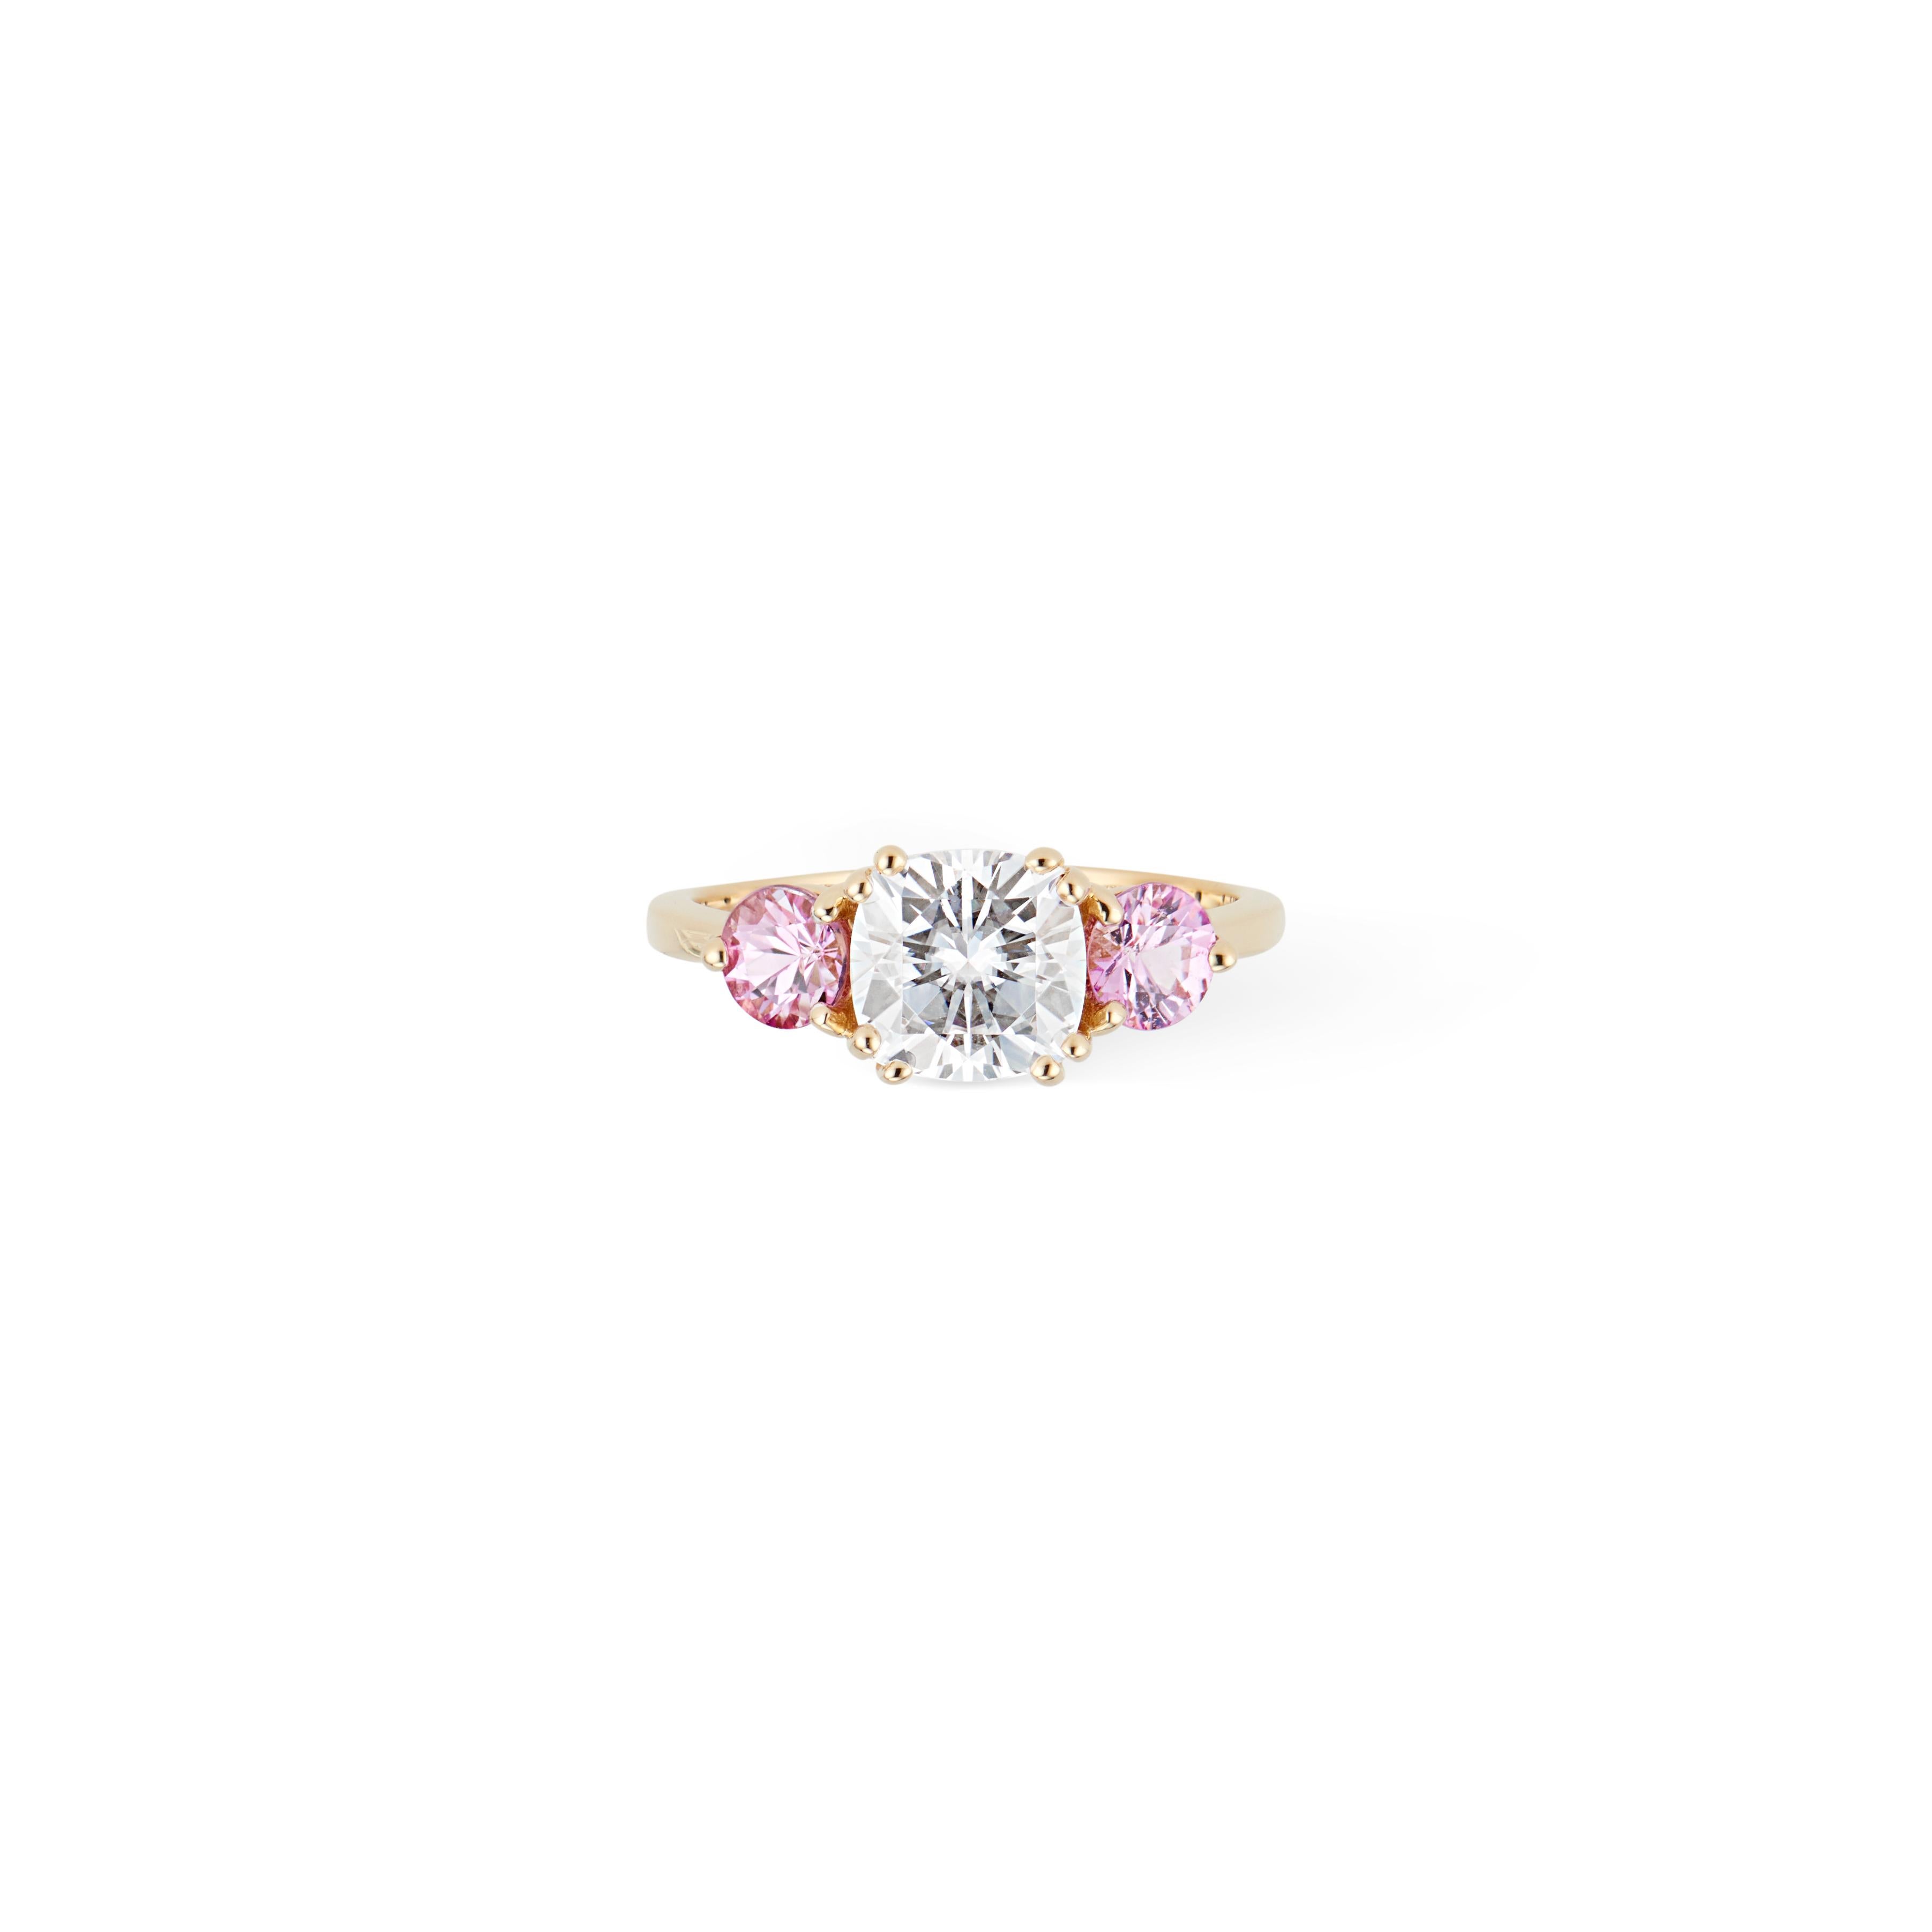 Gorgeous 1.5 carat Cushion Cut Moissanite accented with two Natural Pink Sapphires set in a high polish 14k yellow gold setting.

Three stone Engagement rings are enjoying a huge moment of popularity currently and 
are said to be symbolic of the